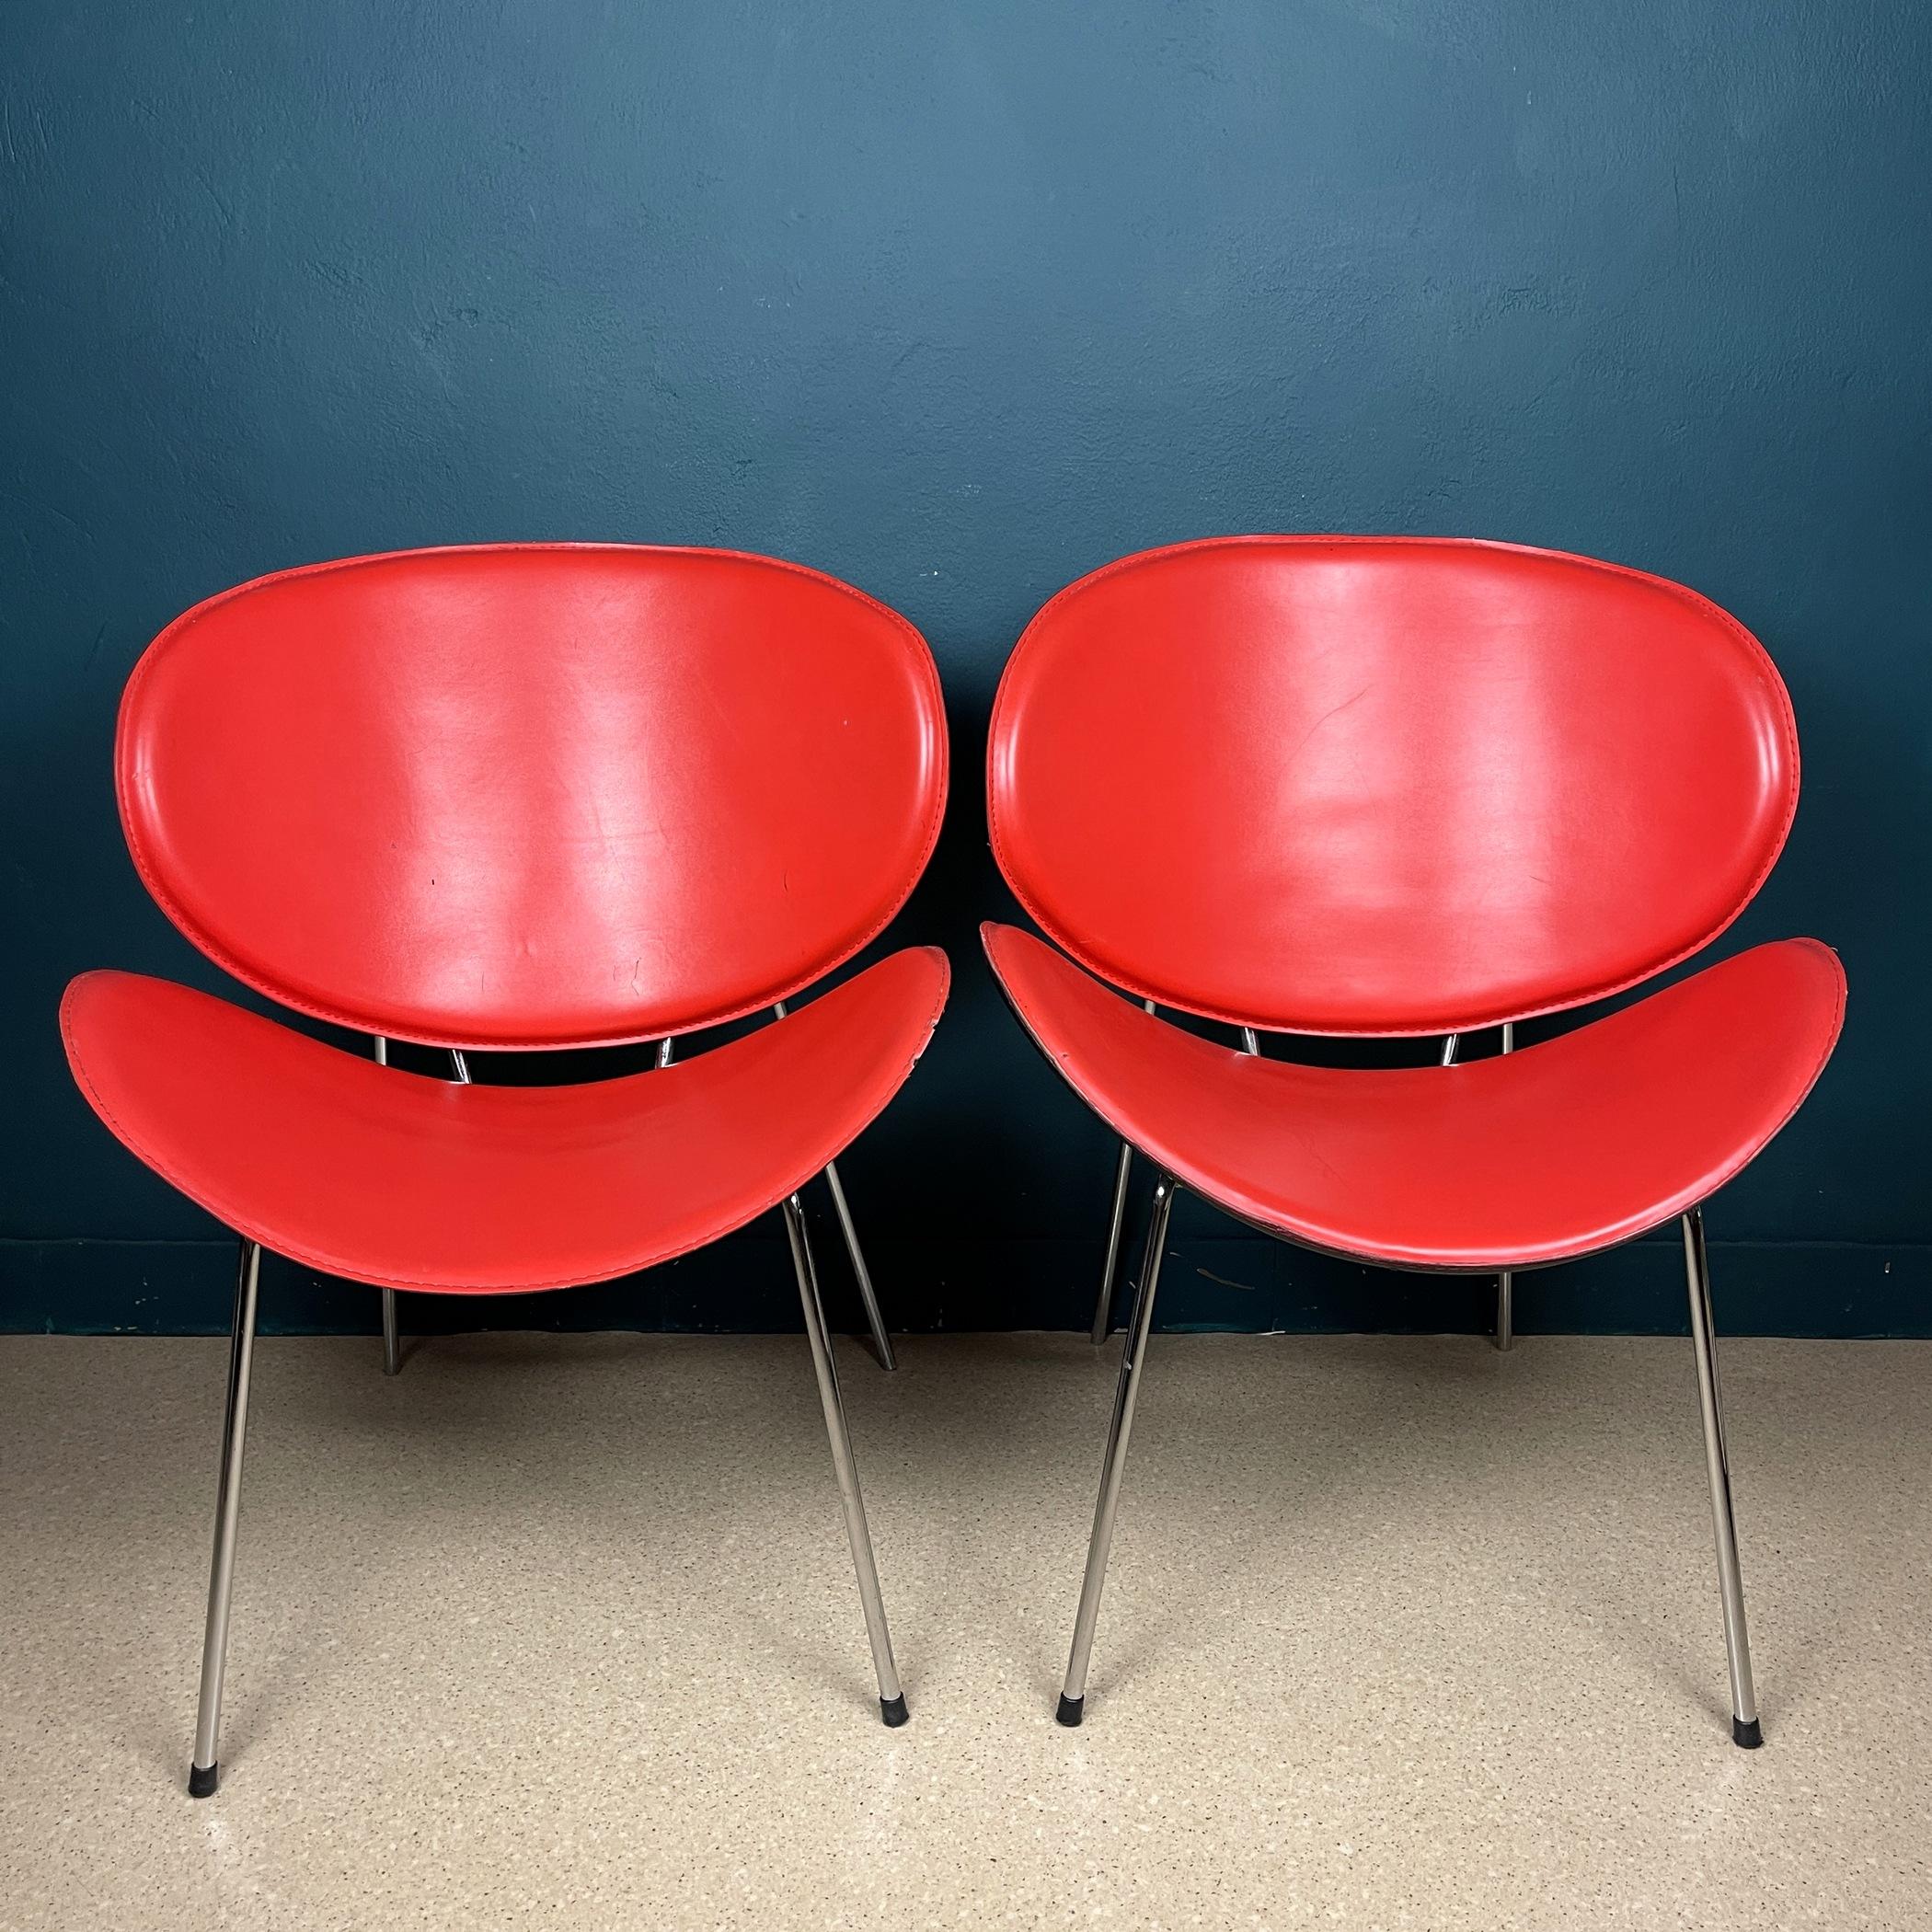 Italian Pair of red lounge chairs Italy 1990s Design Pierre Paulin Style For Sale